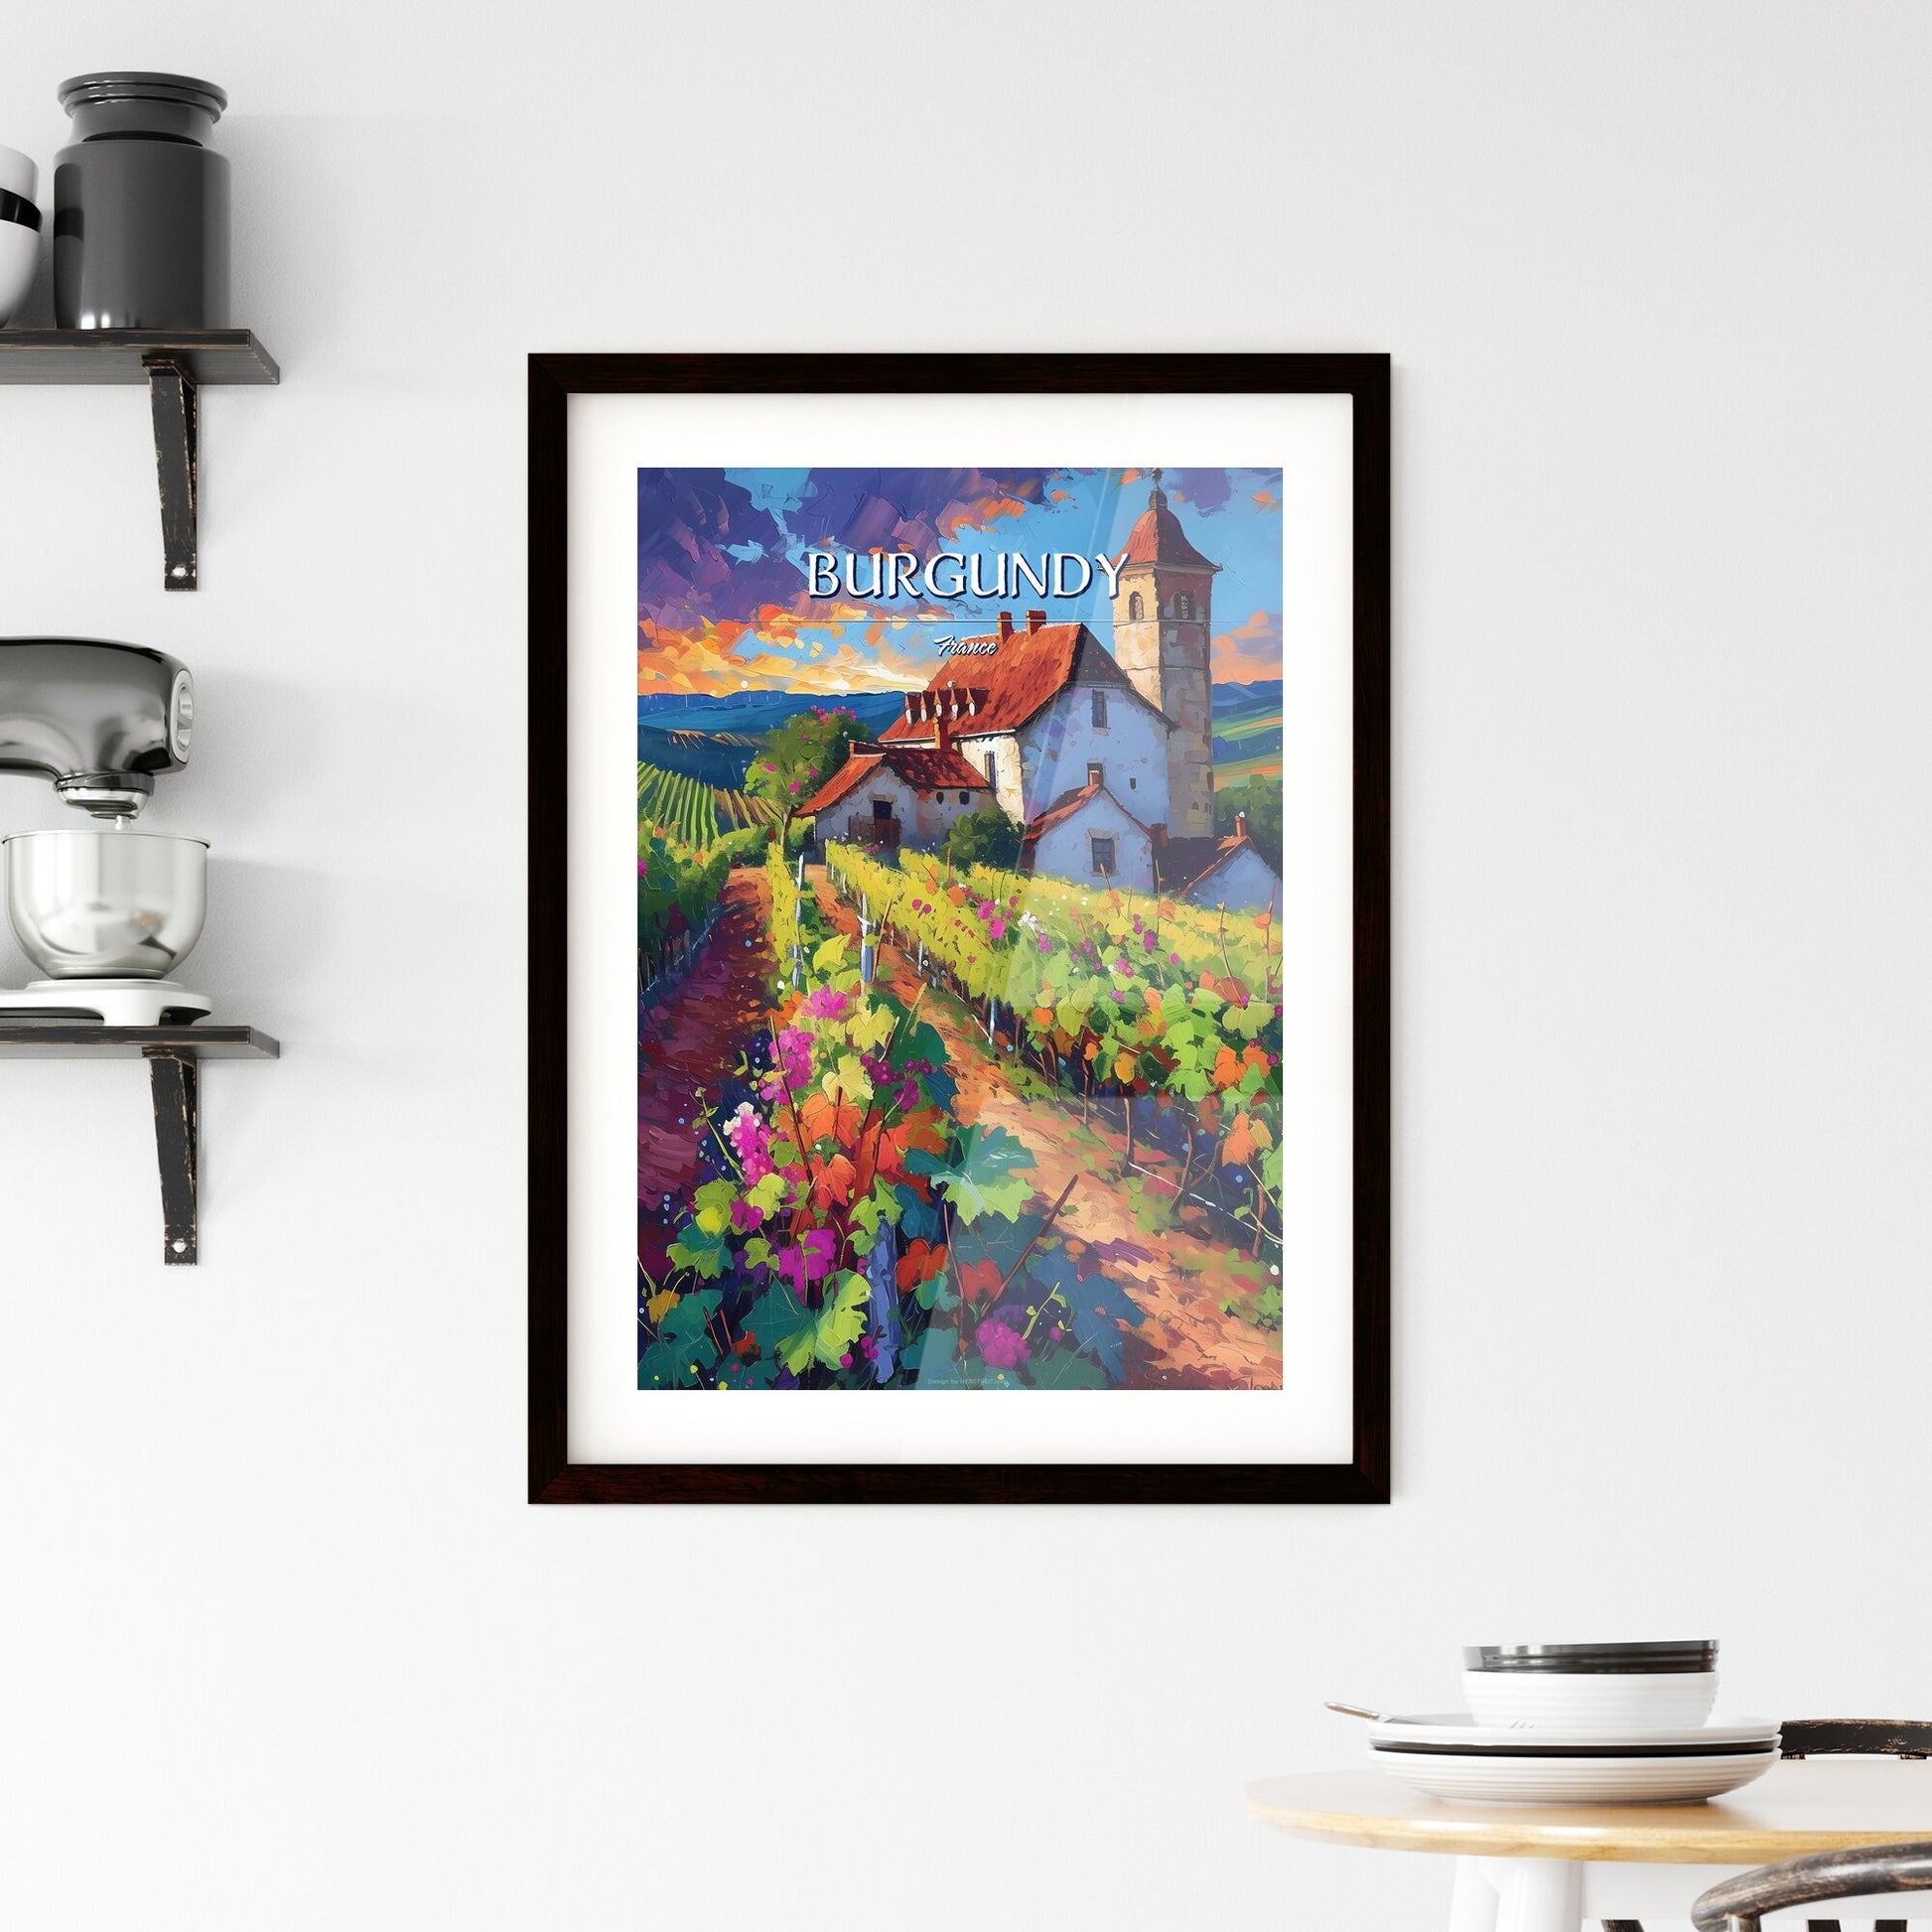 Burgundy, France - Art print of a river with buildings and trees Default Title